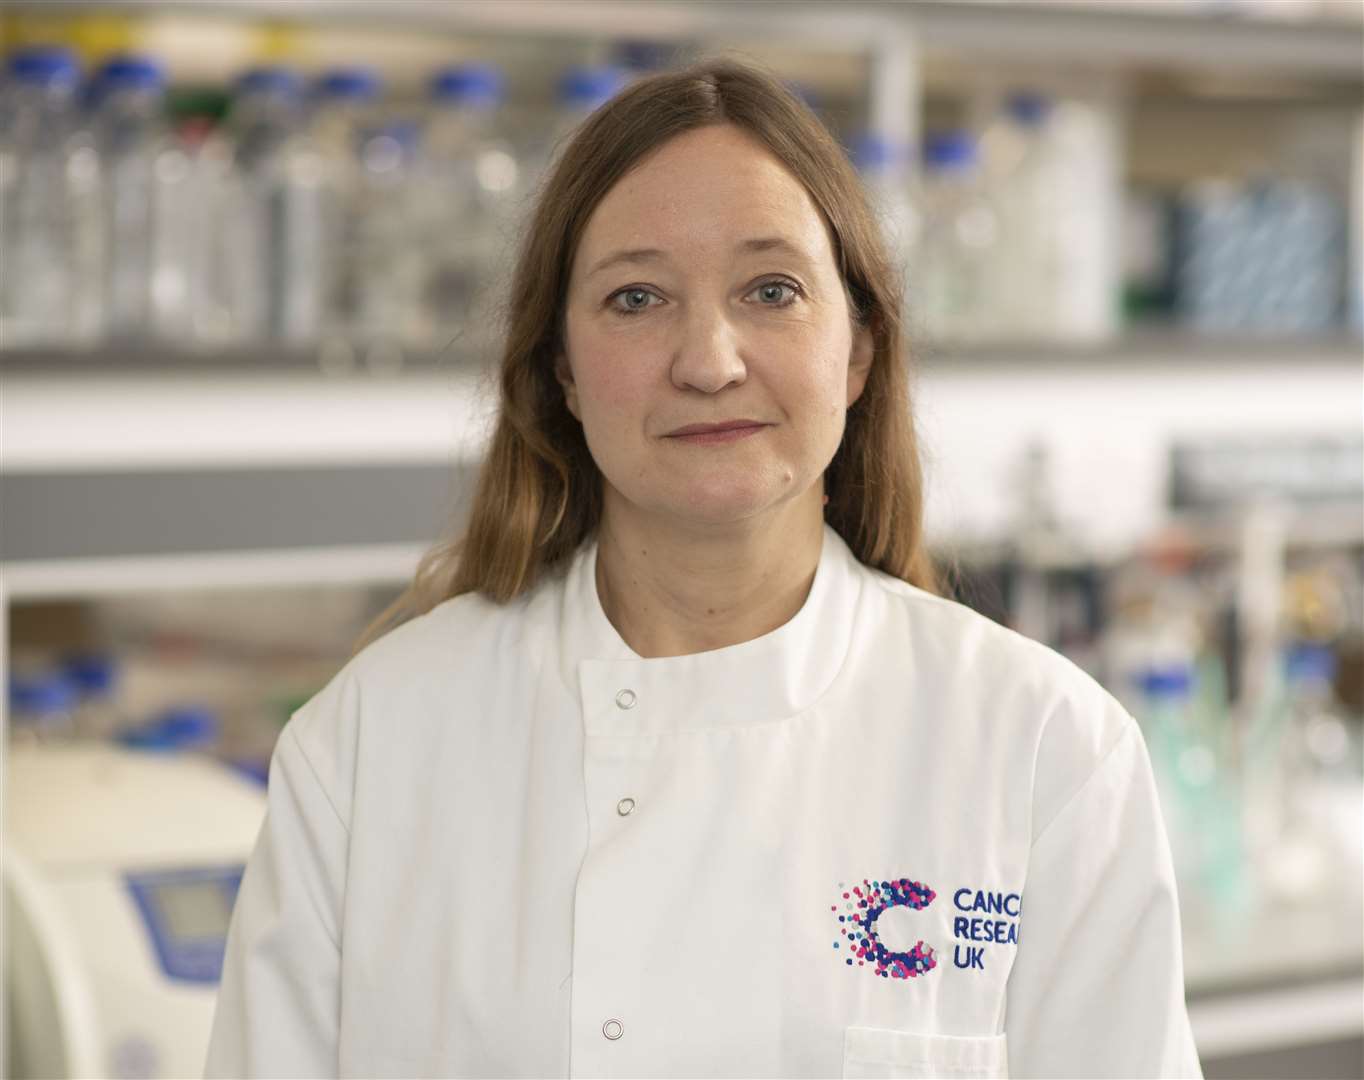 Dr Nerissa Kirkwood is a researcher in a Cancer Research UK funded lab at the University of Kent